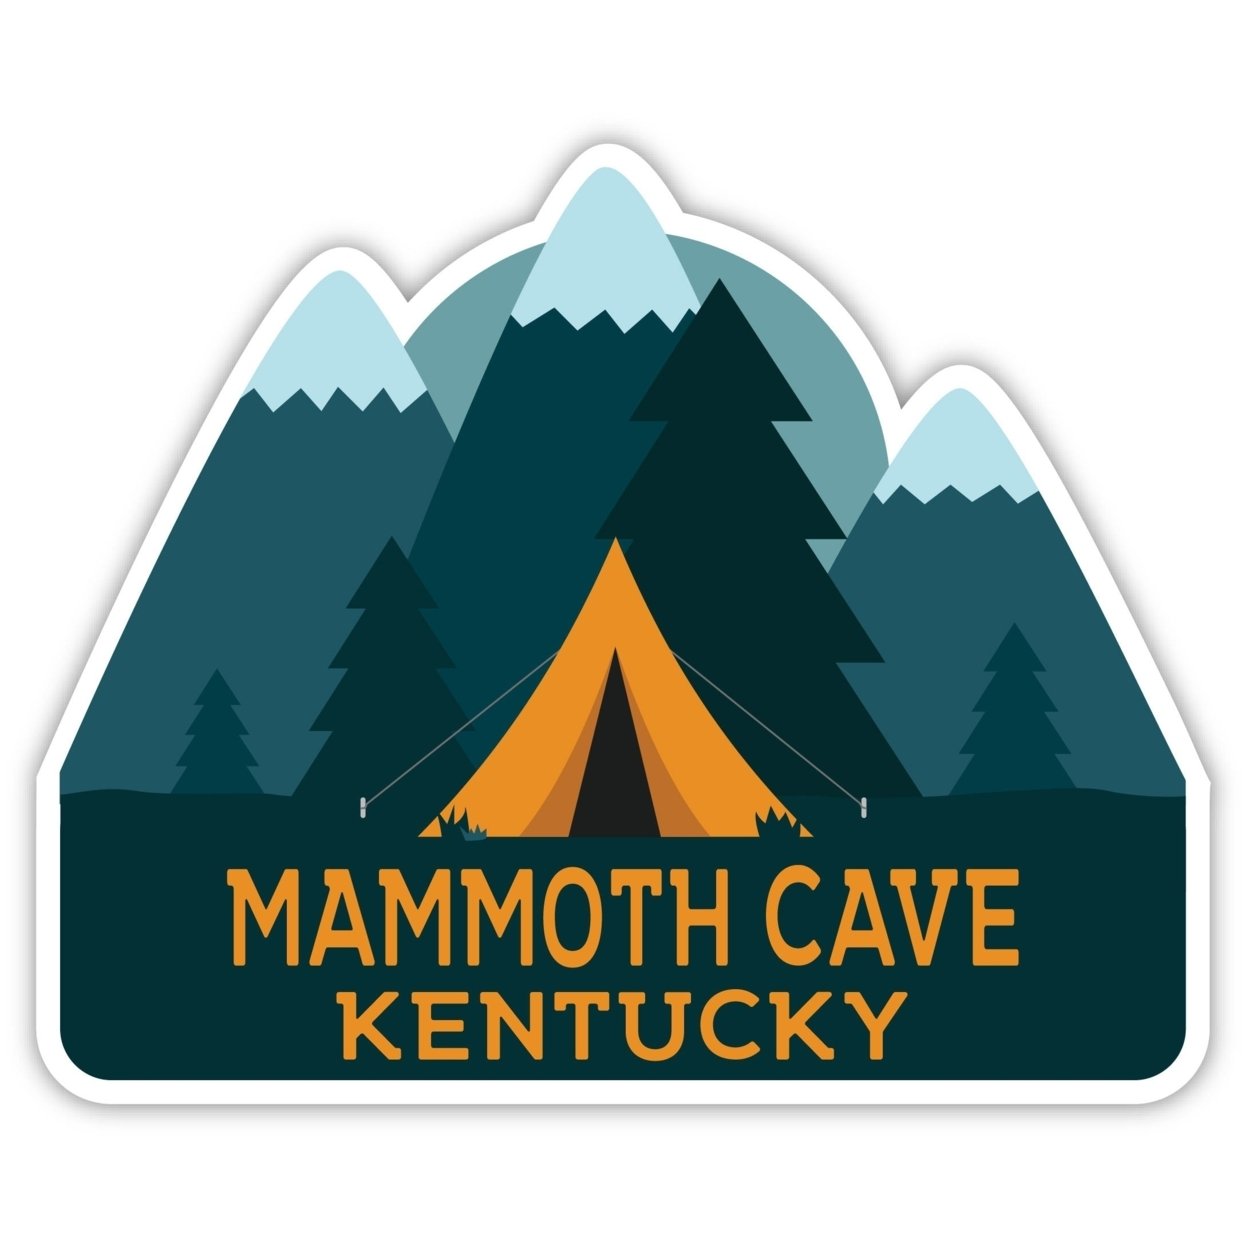 Mammoth Cave Kentucky Souvenir Decorative Stickers (Choose Theme And Size) - 2-Inch, Great Outdoors